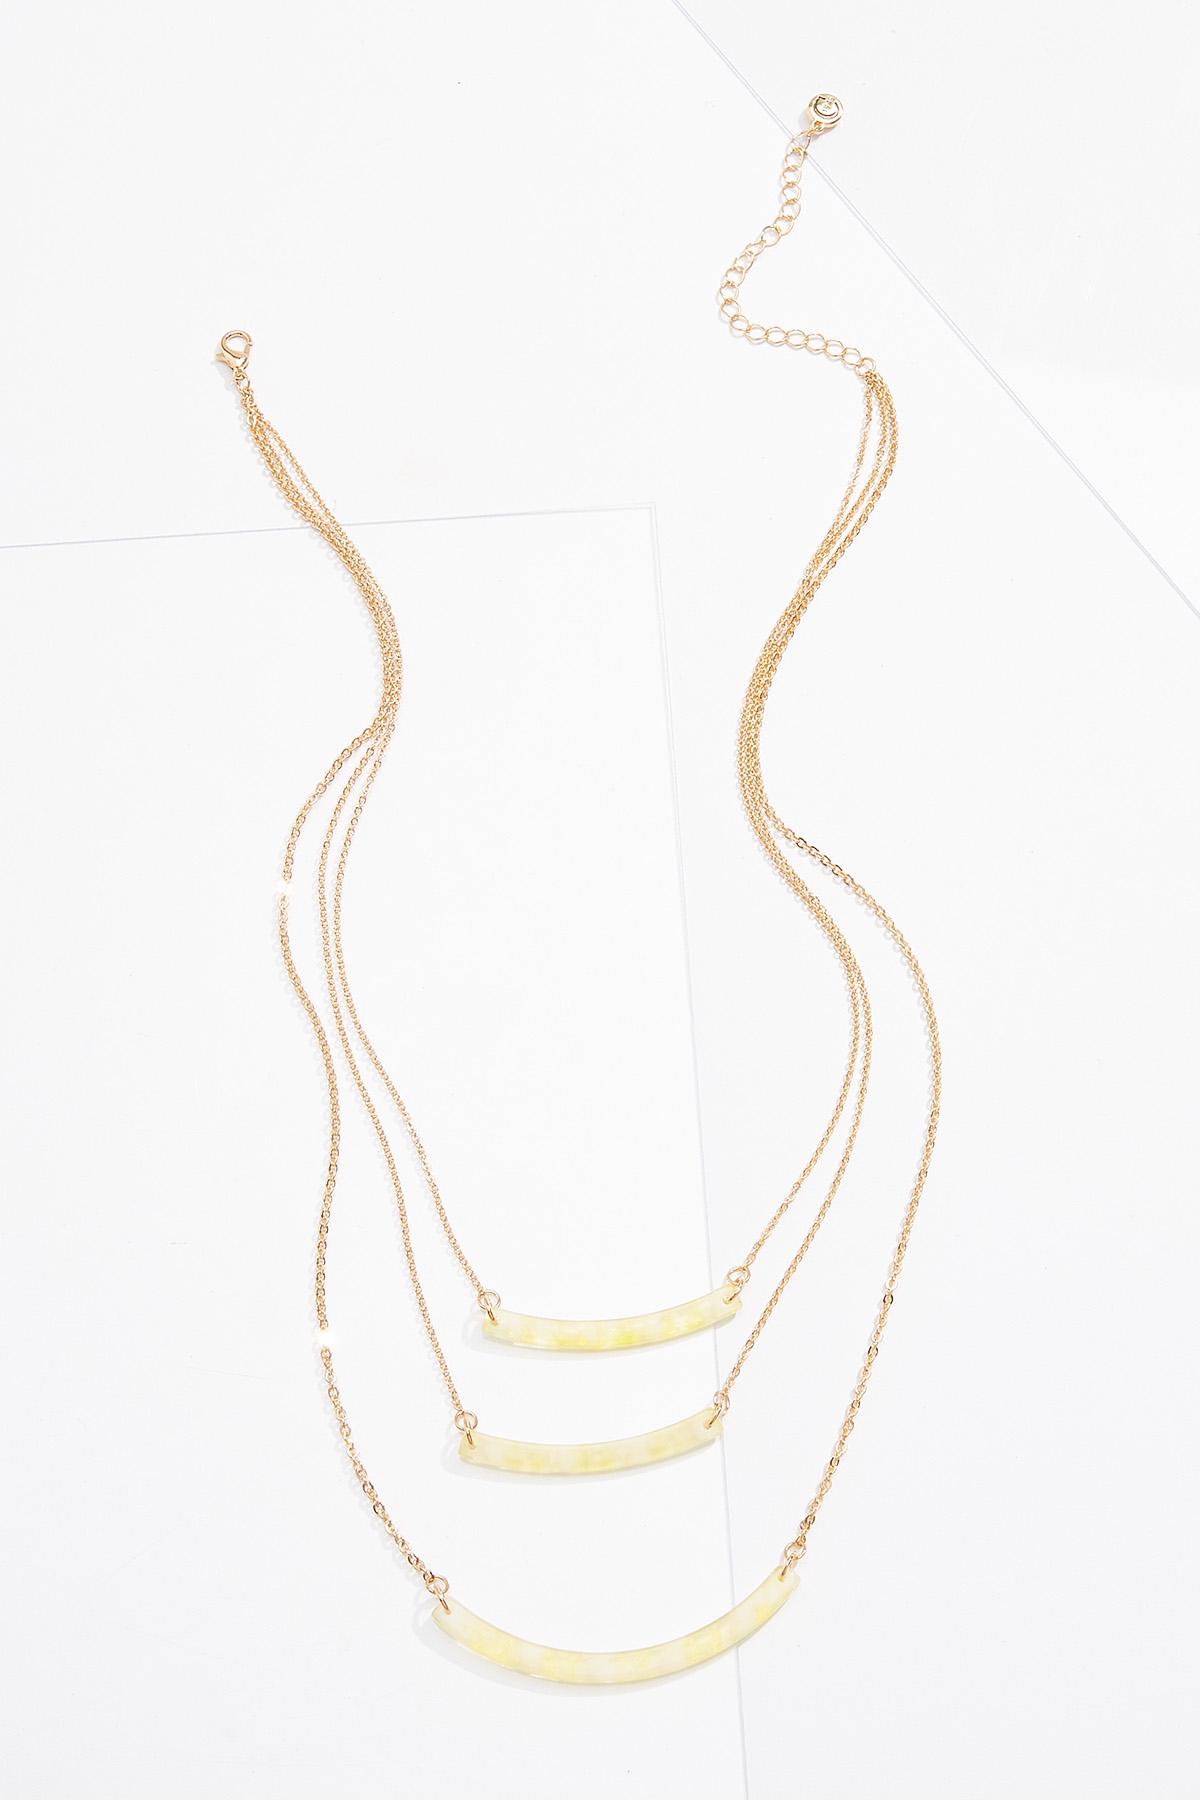 Lucite Bar Layered Necklace